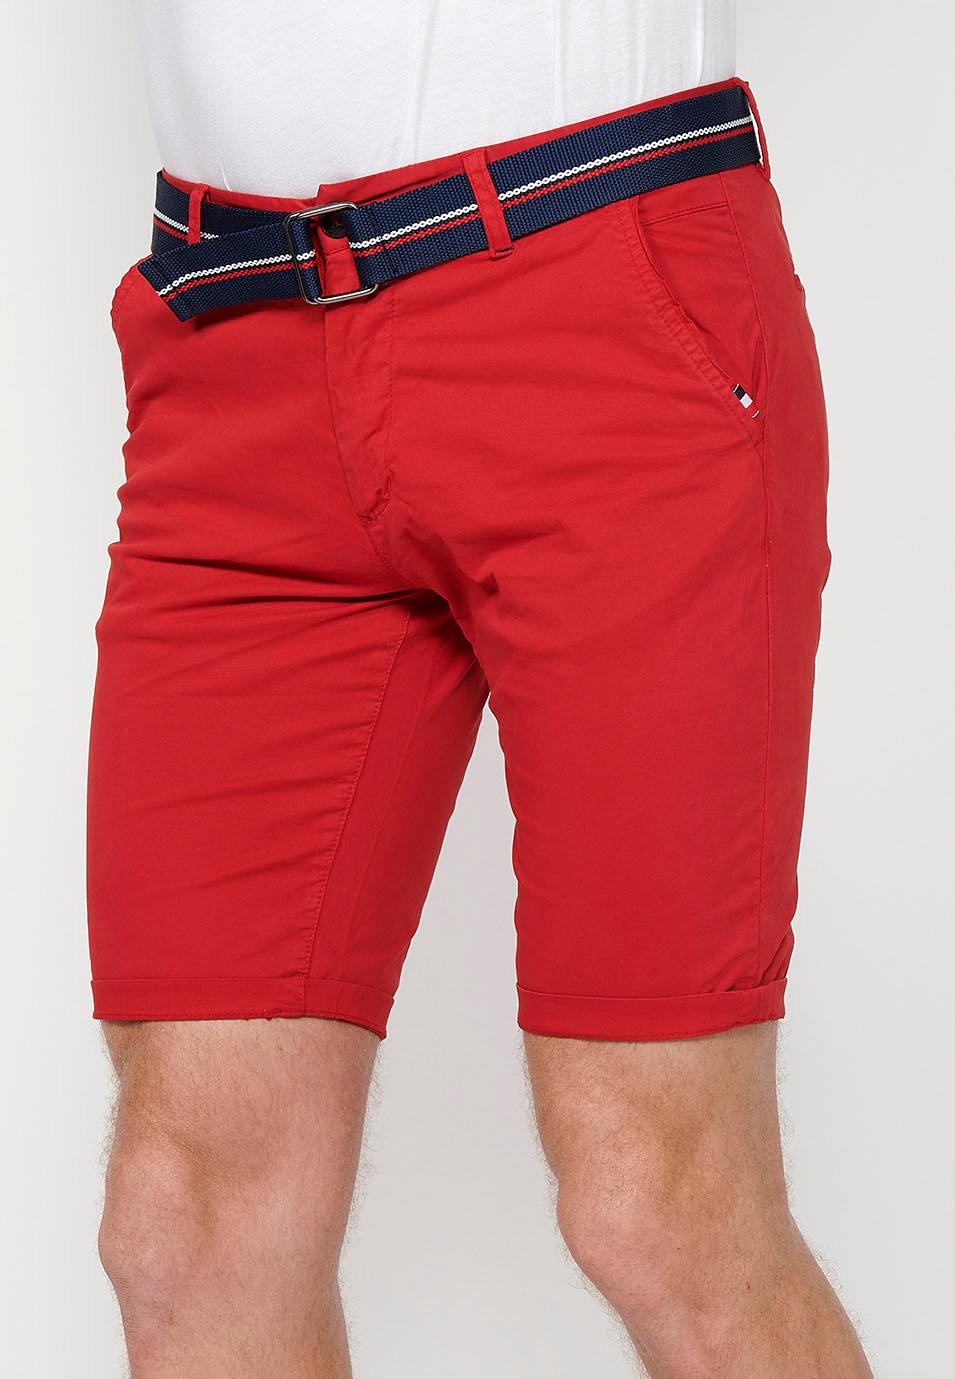 Shorts with cuffed finish with front closure with zipper and button and belt in Red for Men 3